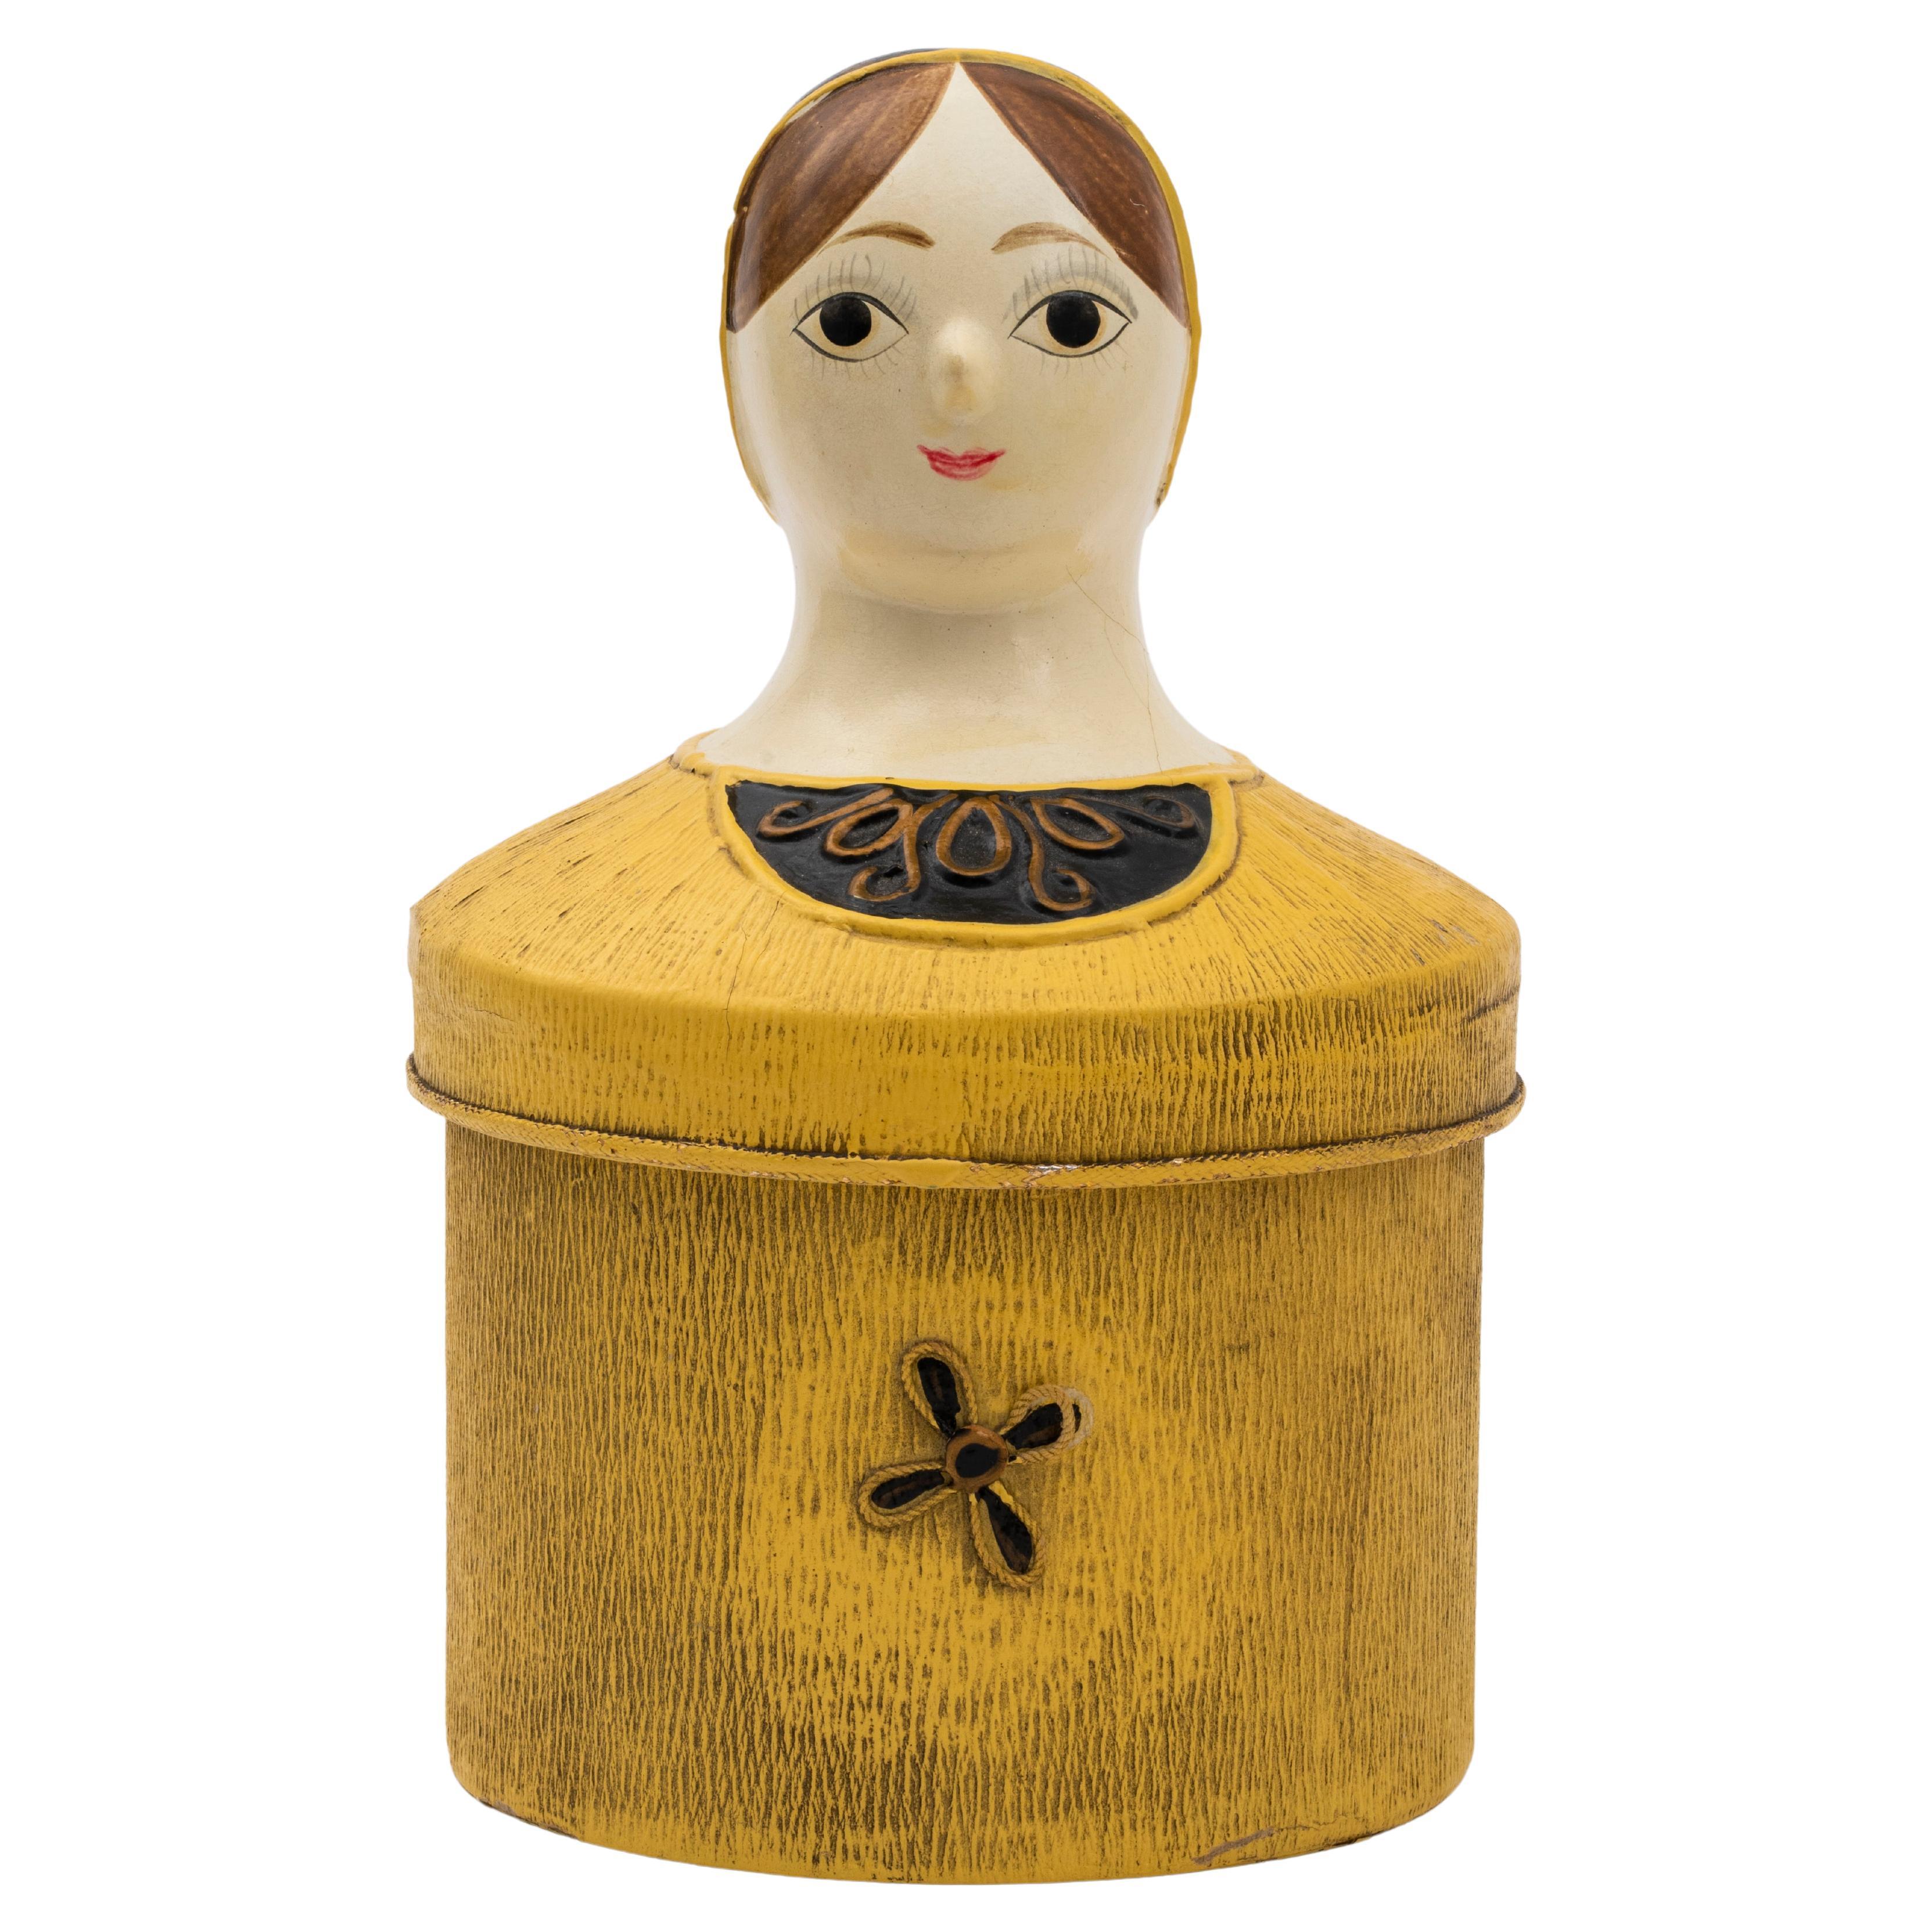 Vintage Paper Mache Doll Decorative Box, Made by I.W. Rice & Co., Made in Japan